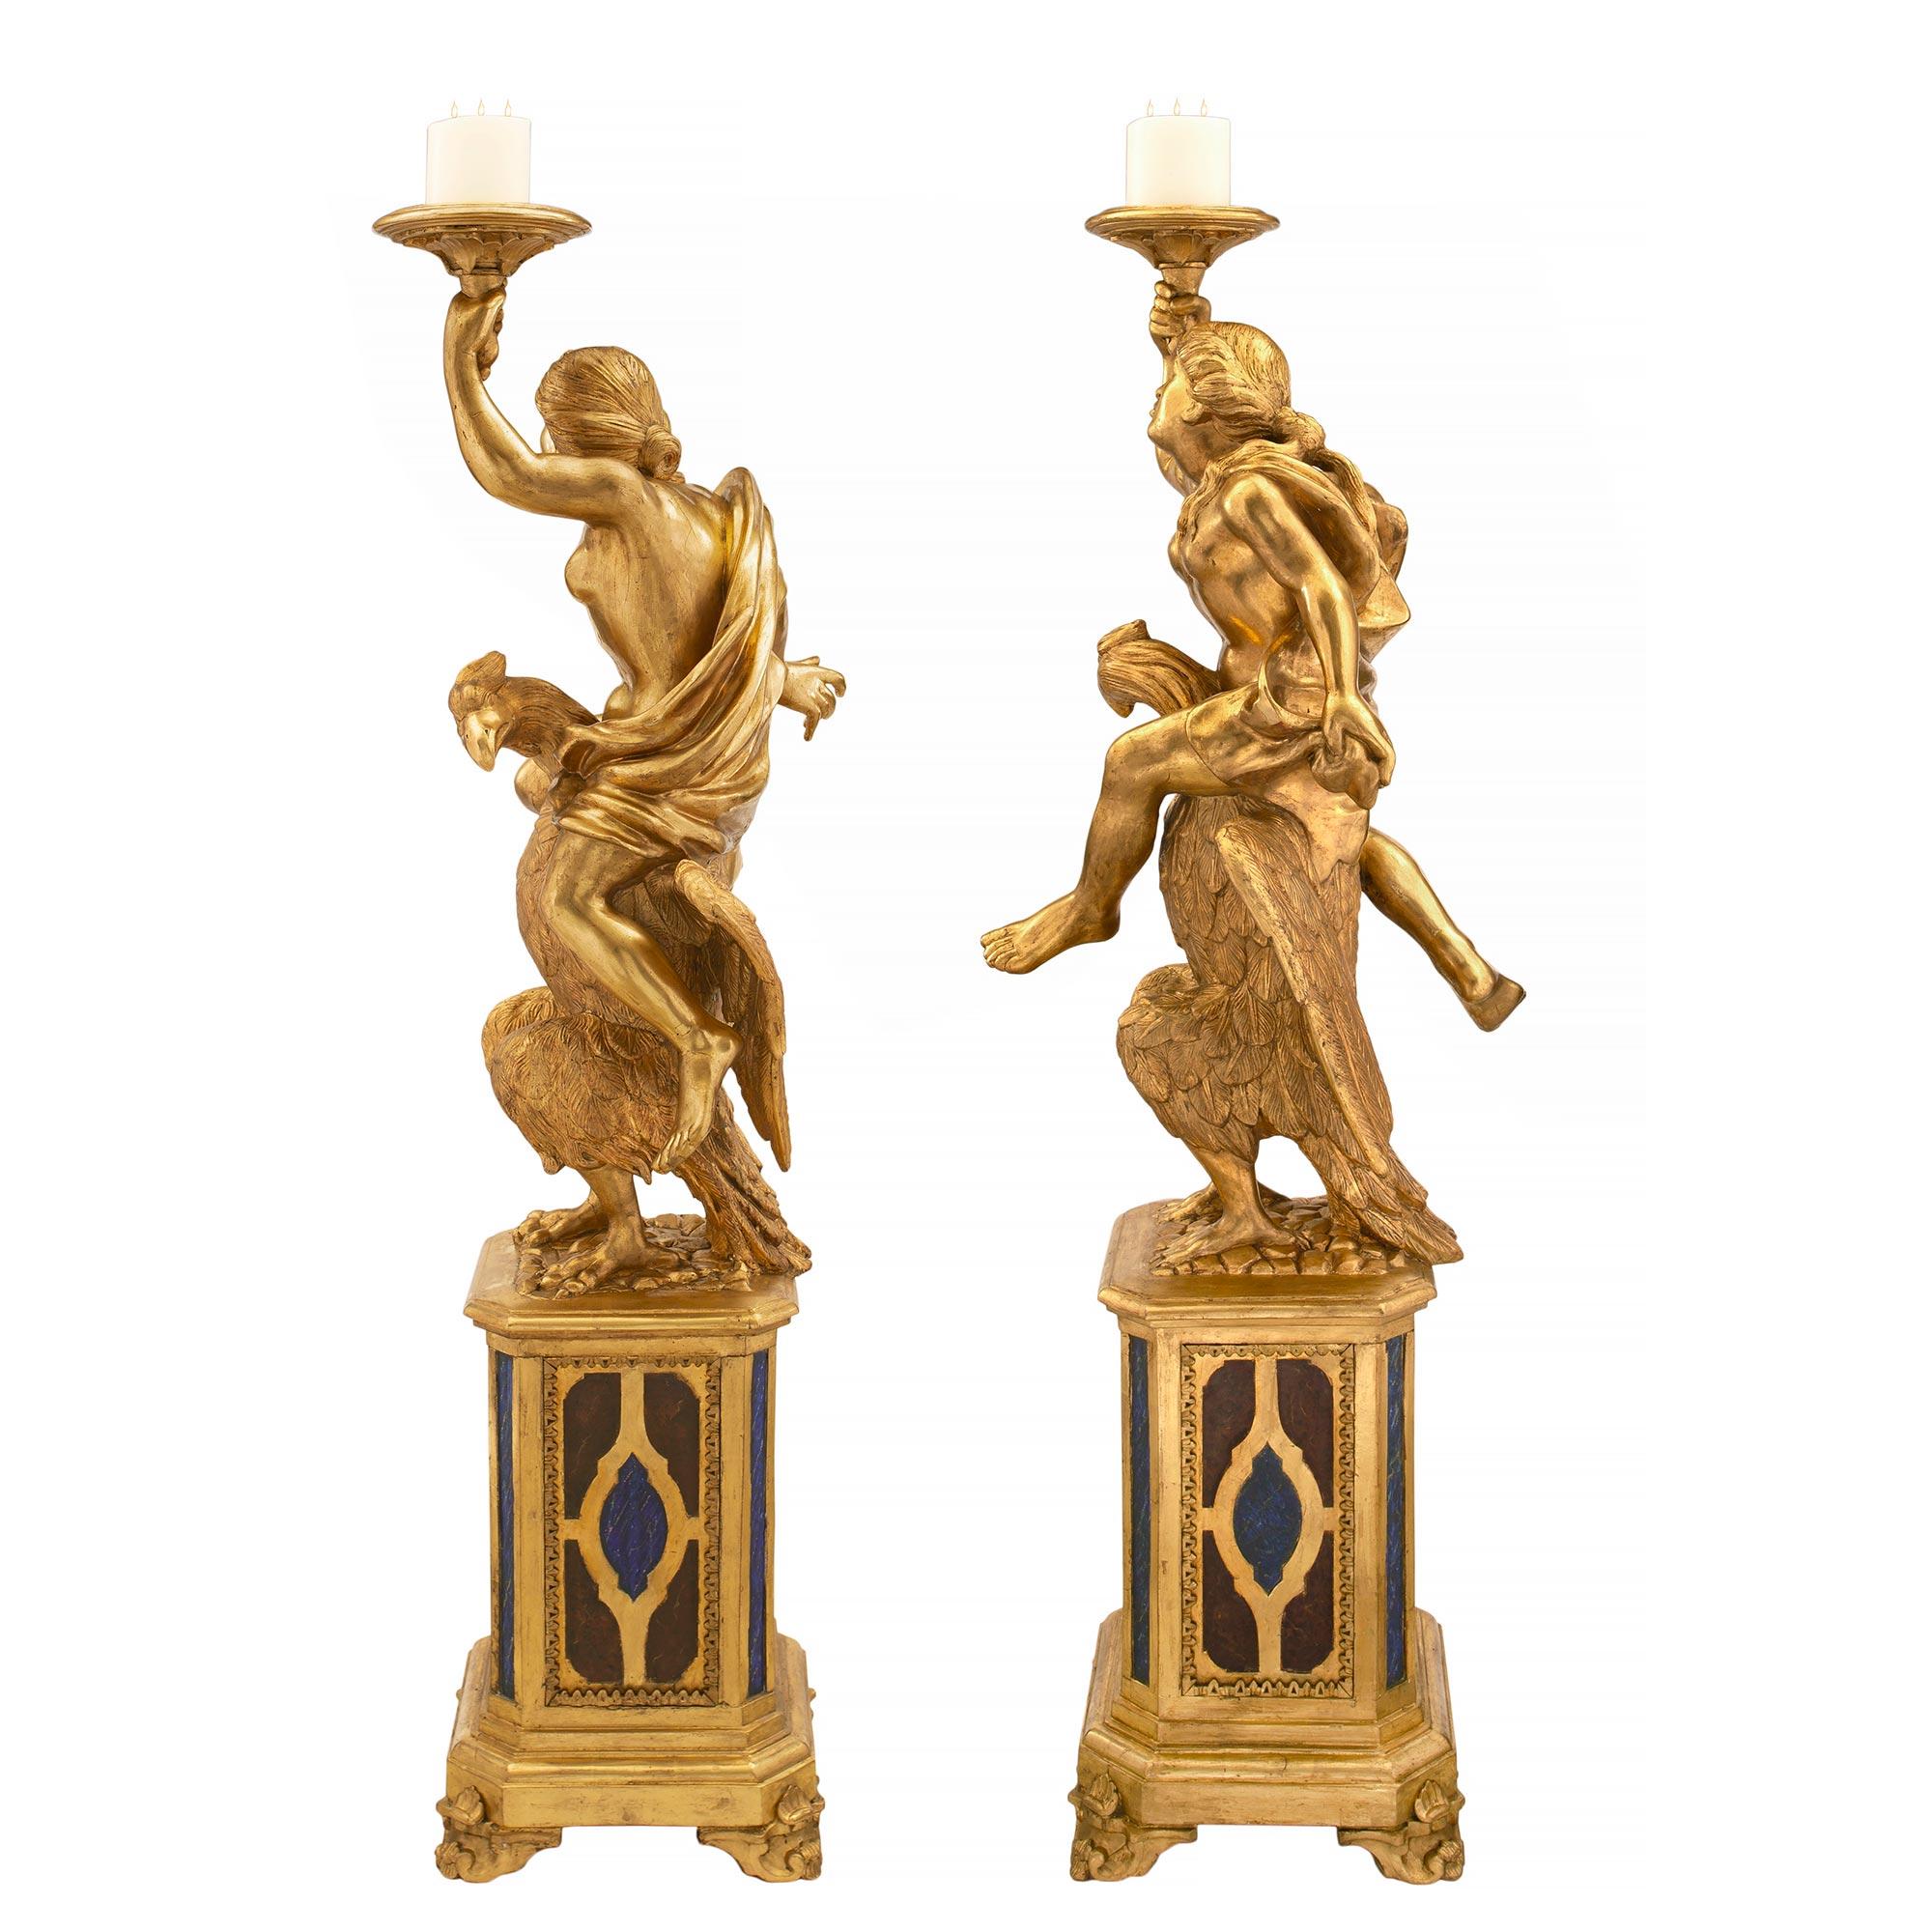 Pair of Italian 18th Century Giltwood and Faux Painted Baroque Torchières For Sale 1